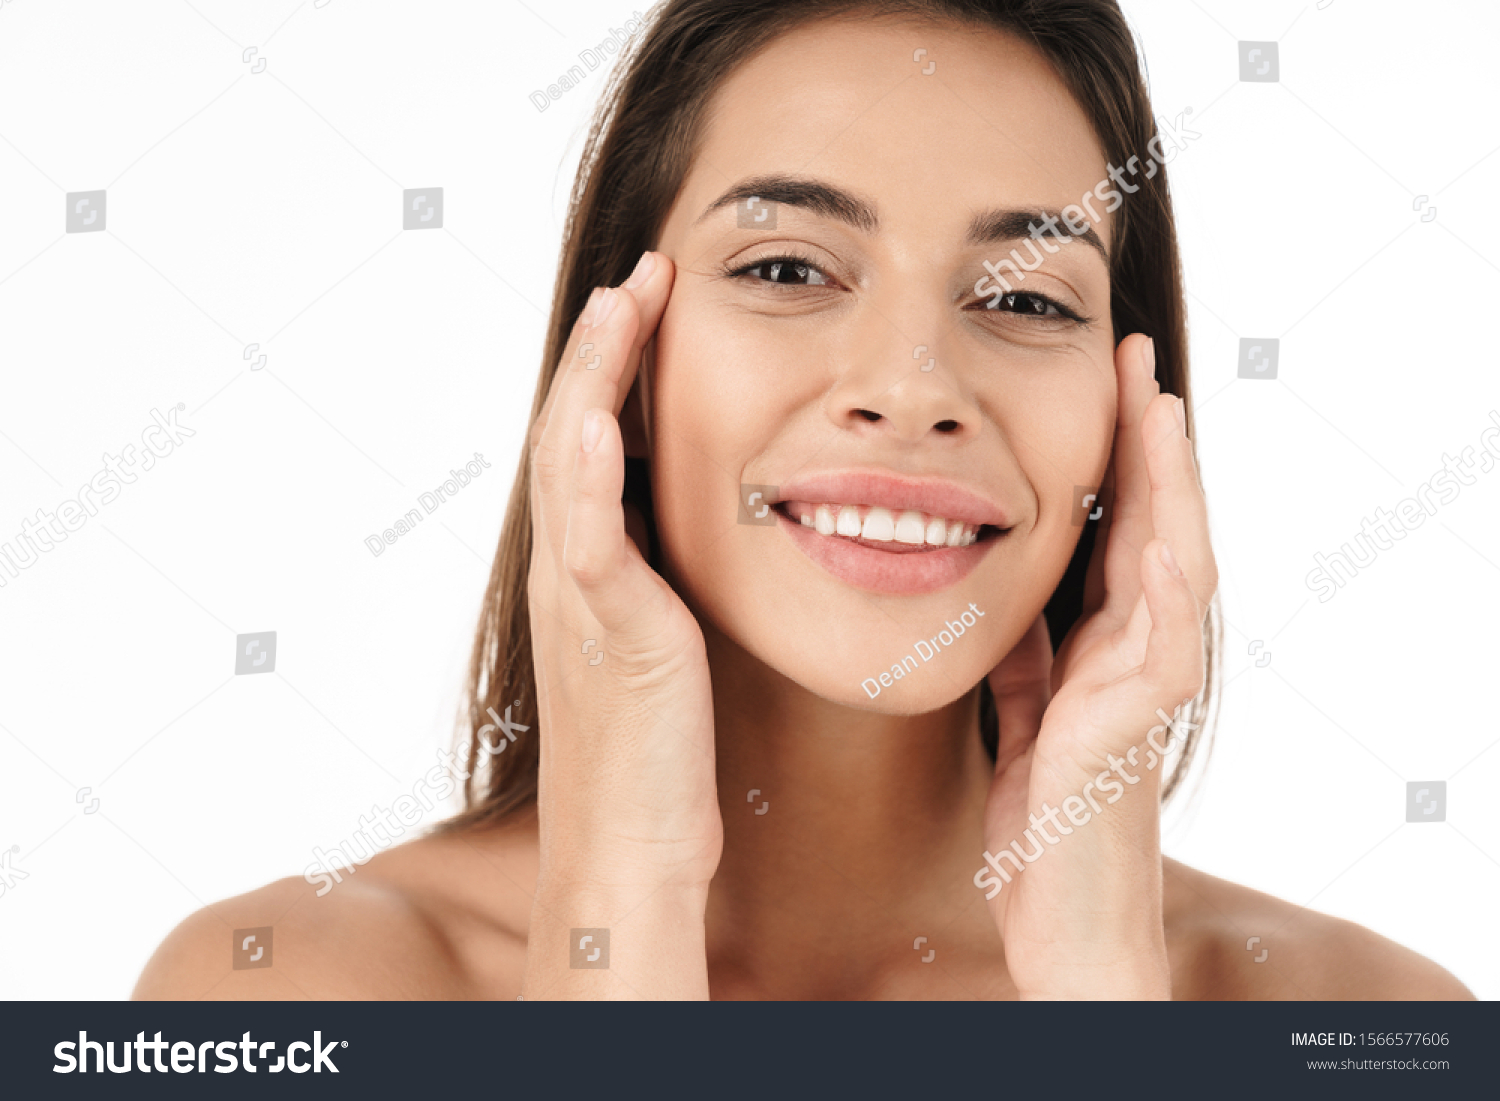 Portrait of charming young brunette half-naked woman smiling and touching her face isolated over white background #1566577606